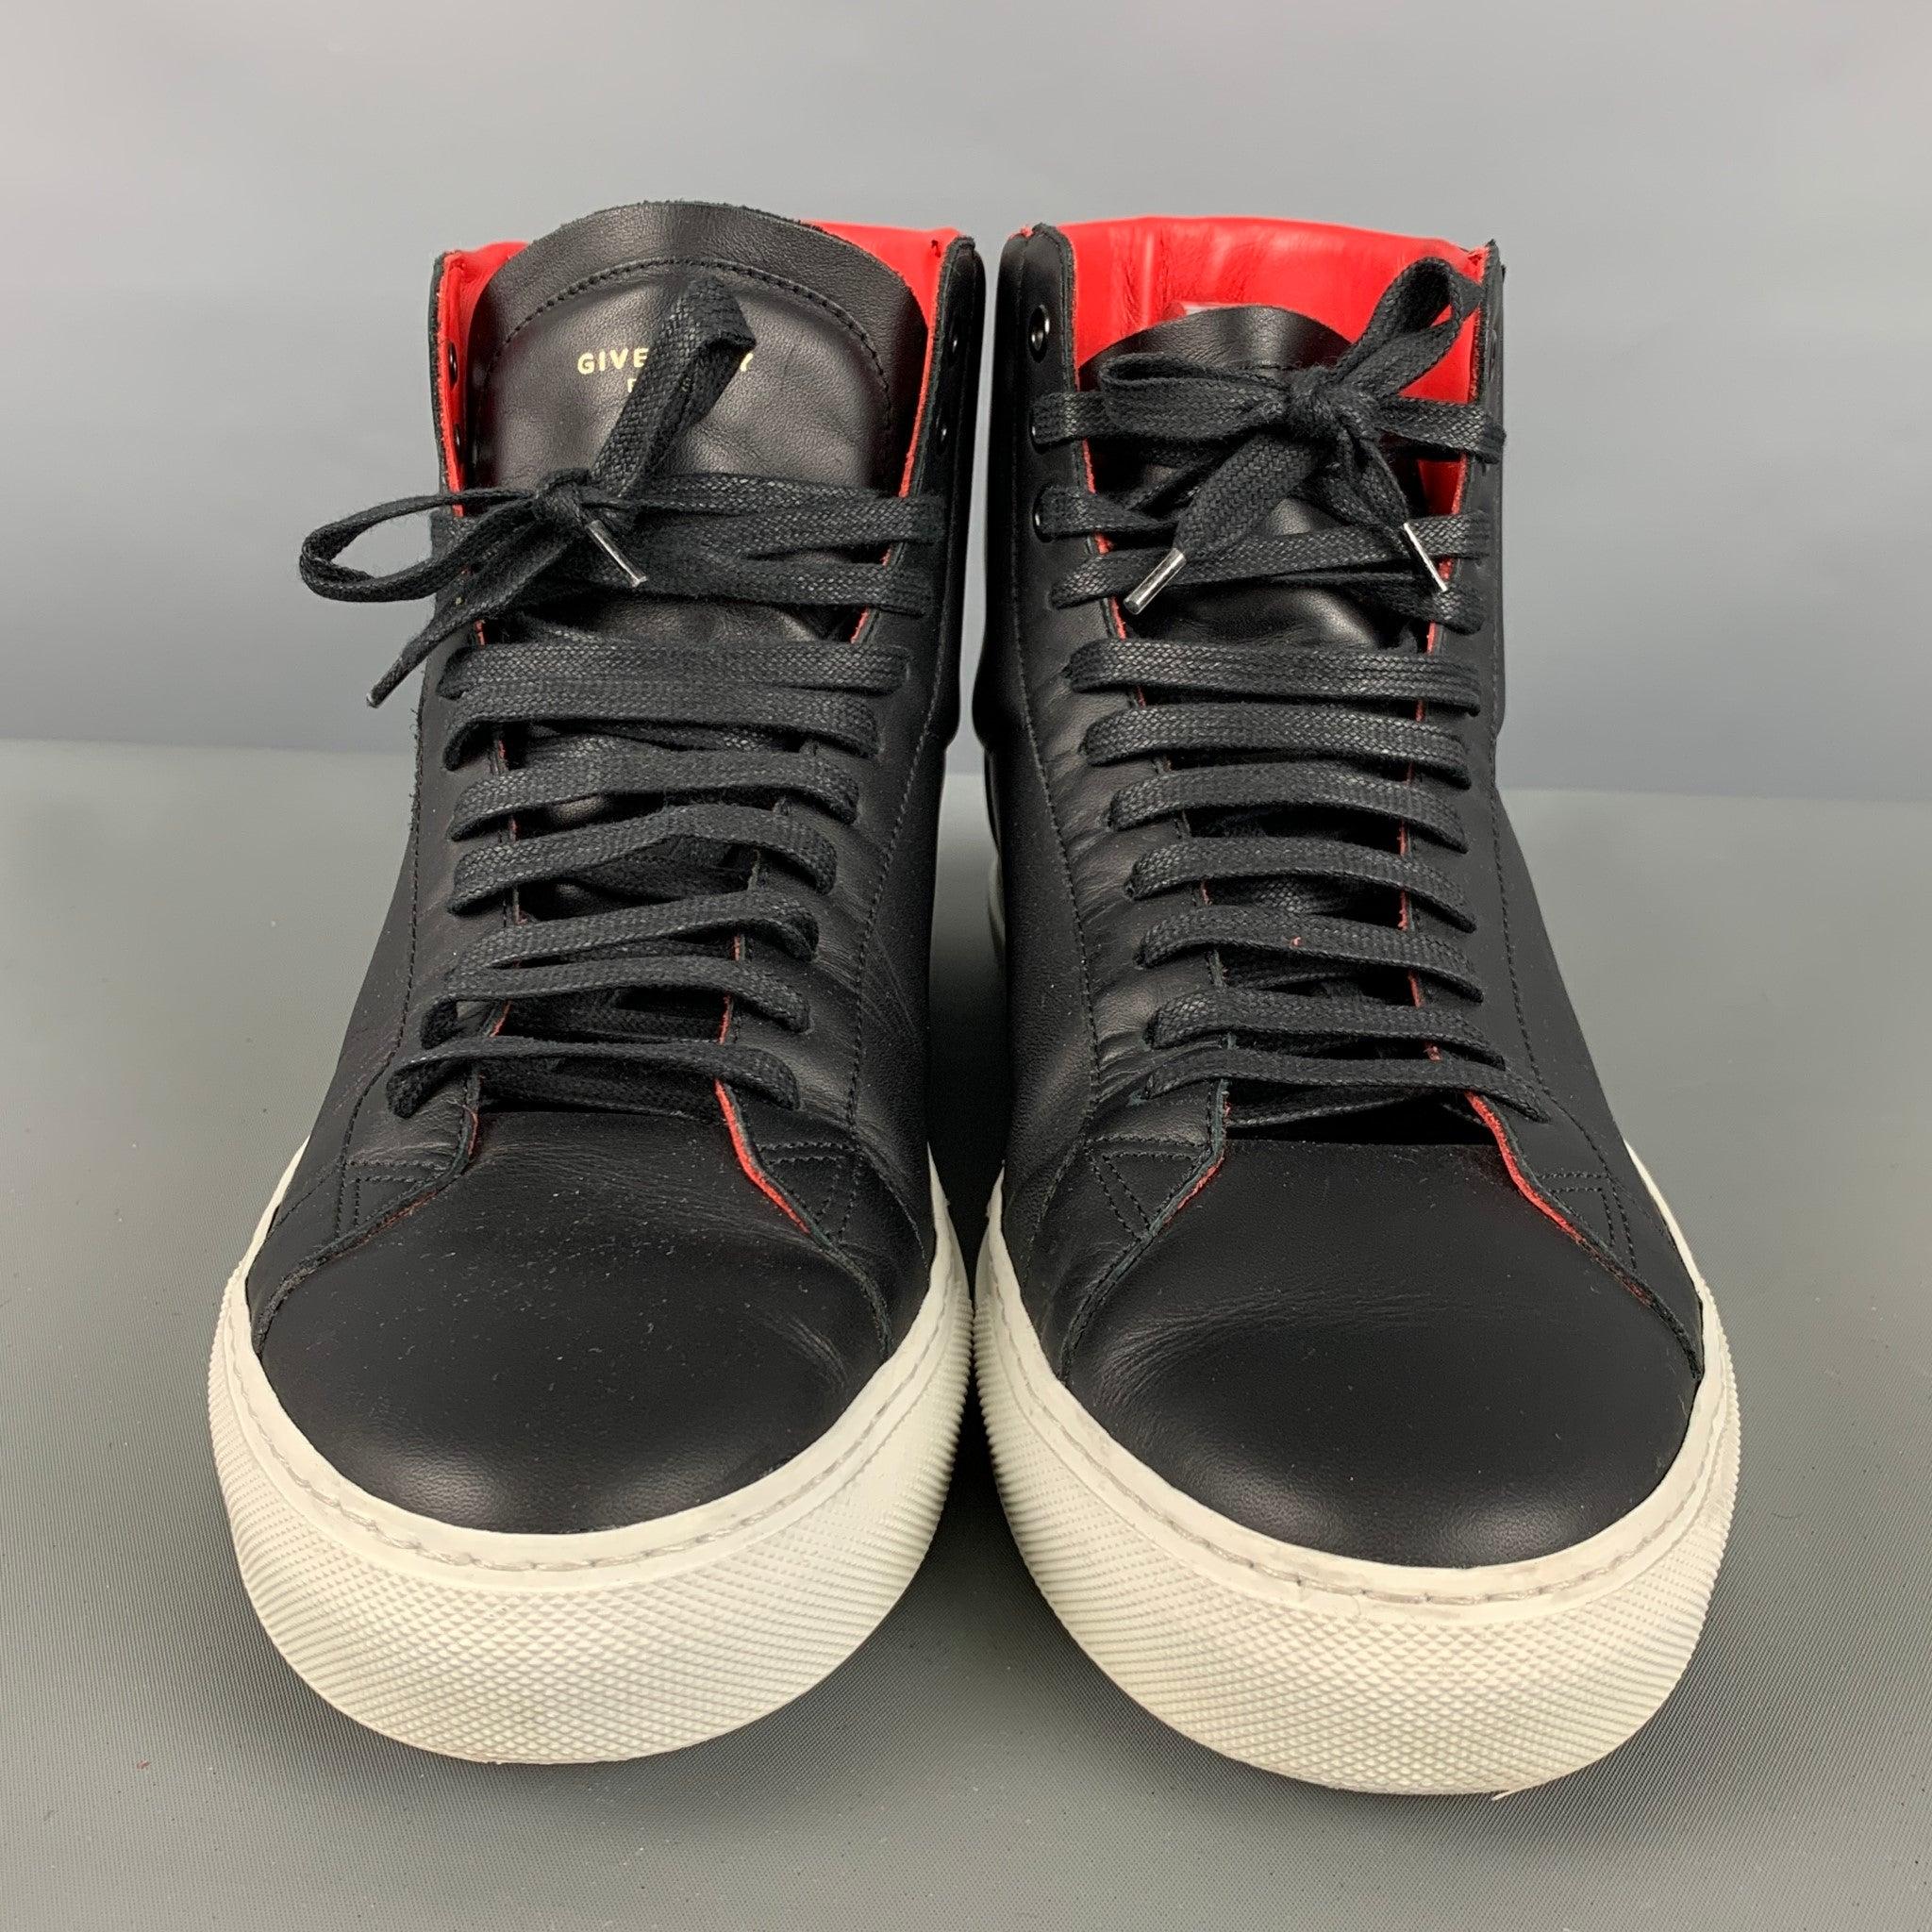 Men's GIVENCHY Size 10 Black Red & White Color Block Leather High Top Sneakers For Sale